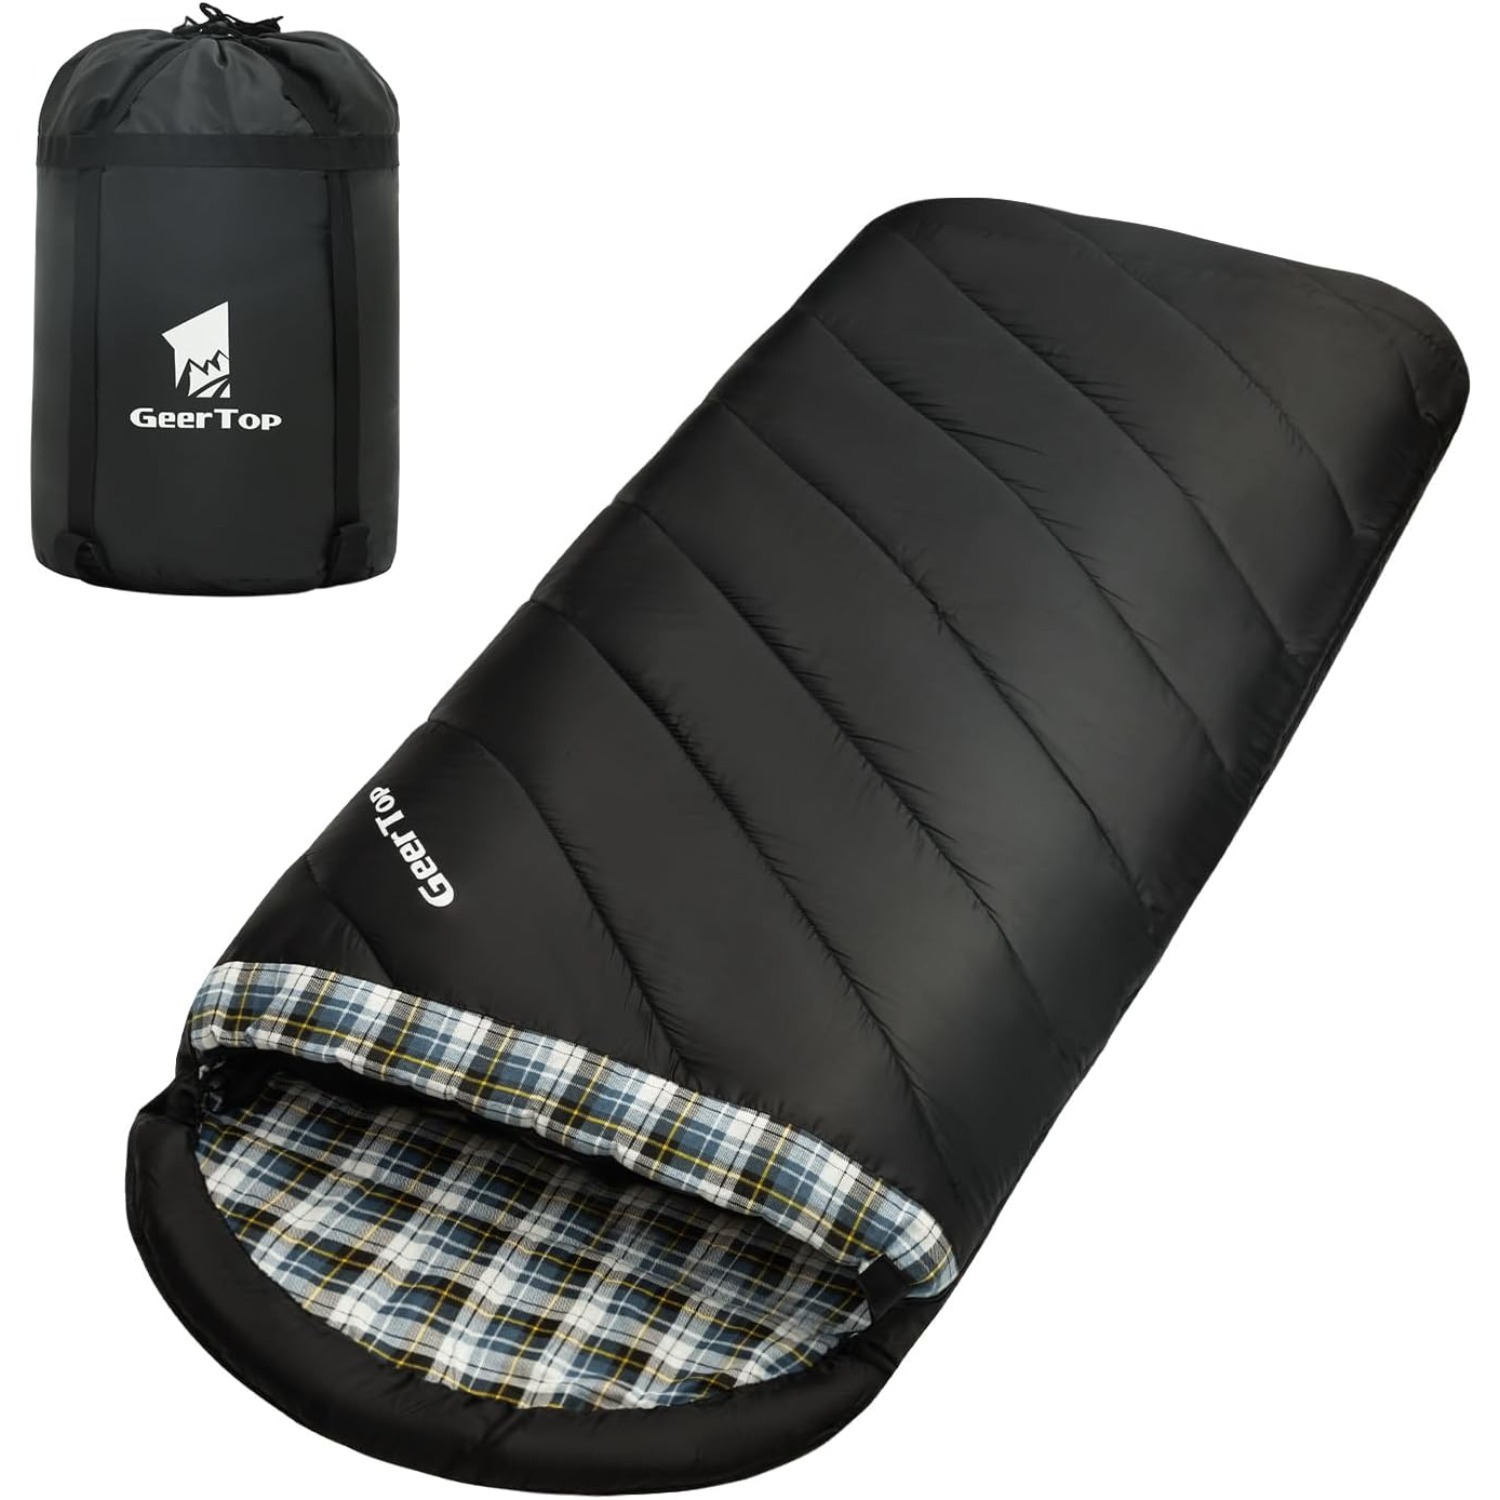 

Geertop Flannel Sleeping Bag For Adults Xxl, Large Wide Camping Sleeping Bag 4 Season, 0 Degree Sleeping Bag For Winter Cold Weather